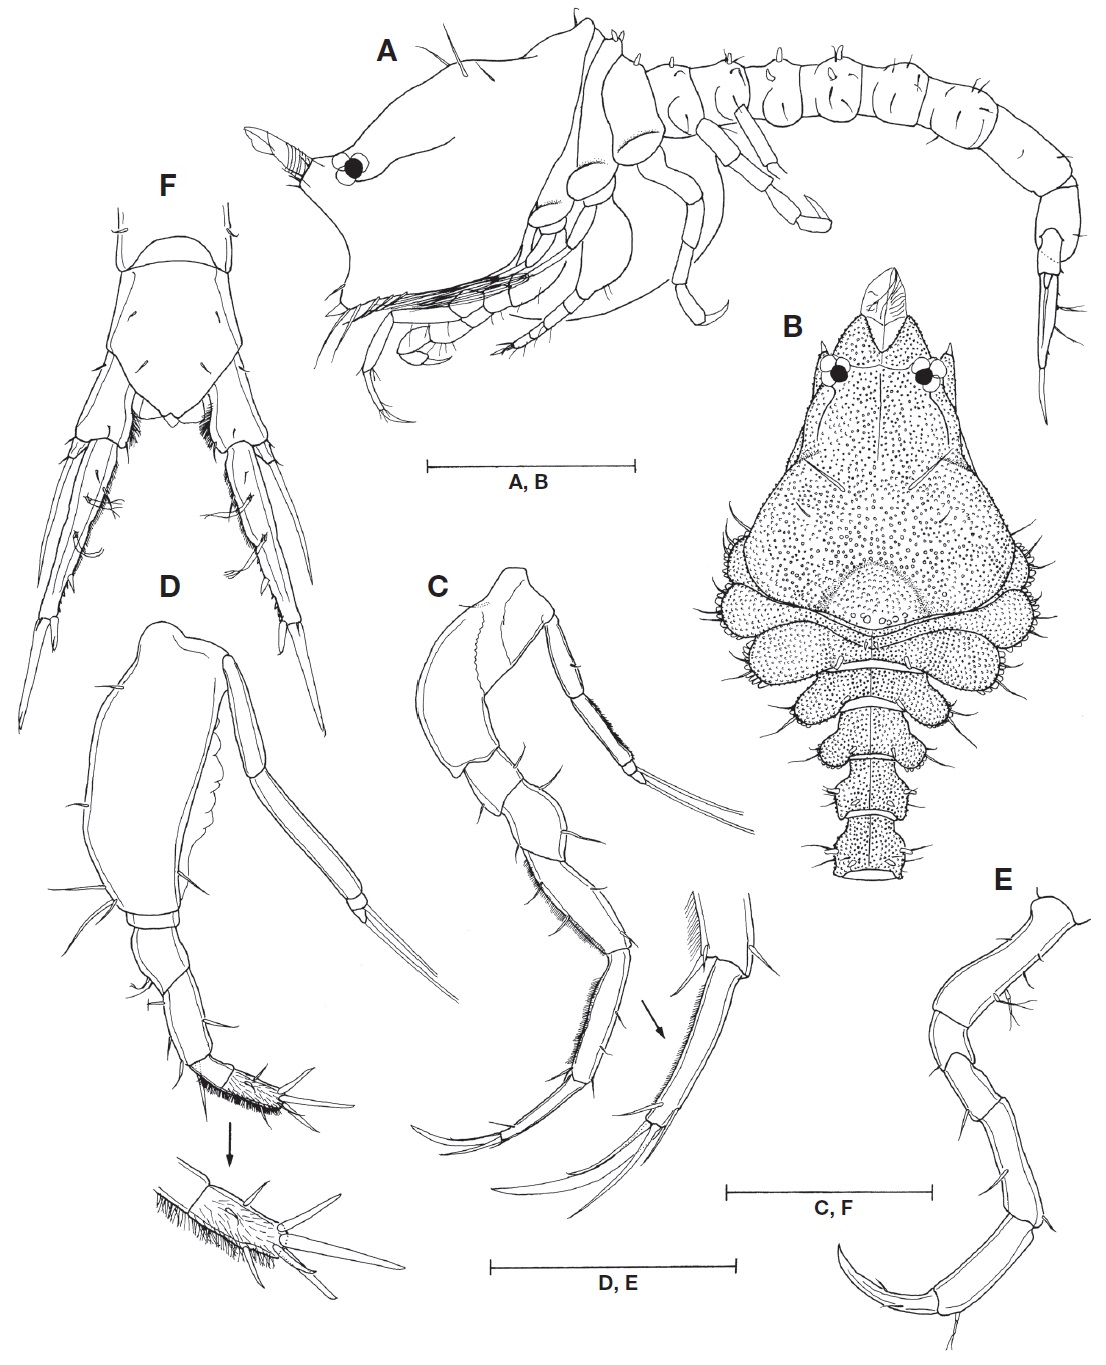 Nannastacus nyctagineus Gam？, adult female: A, Habitus, lateral view; B, Cephalothorax and pleonites, dorsal view; C, Pereopod 1; D, Pereopod 2; E, Pereopod 3; F, Pleonite 6 and uropods. Scale bars: A, B=0.4 mm, C-F=0.2 mm.